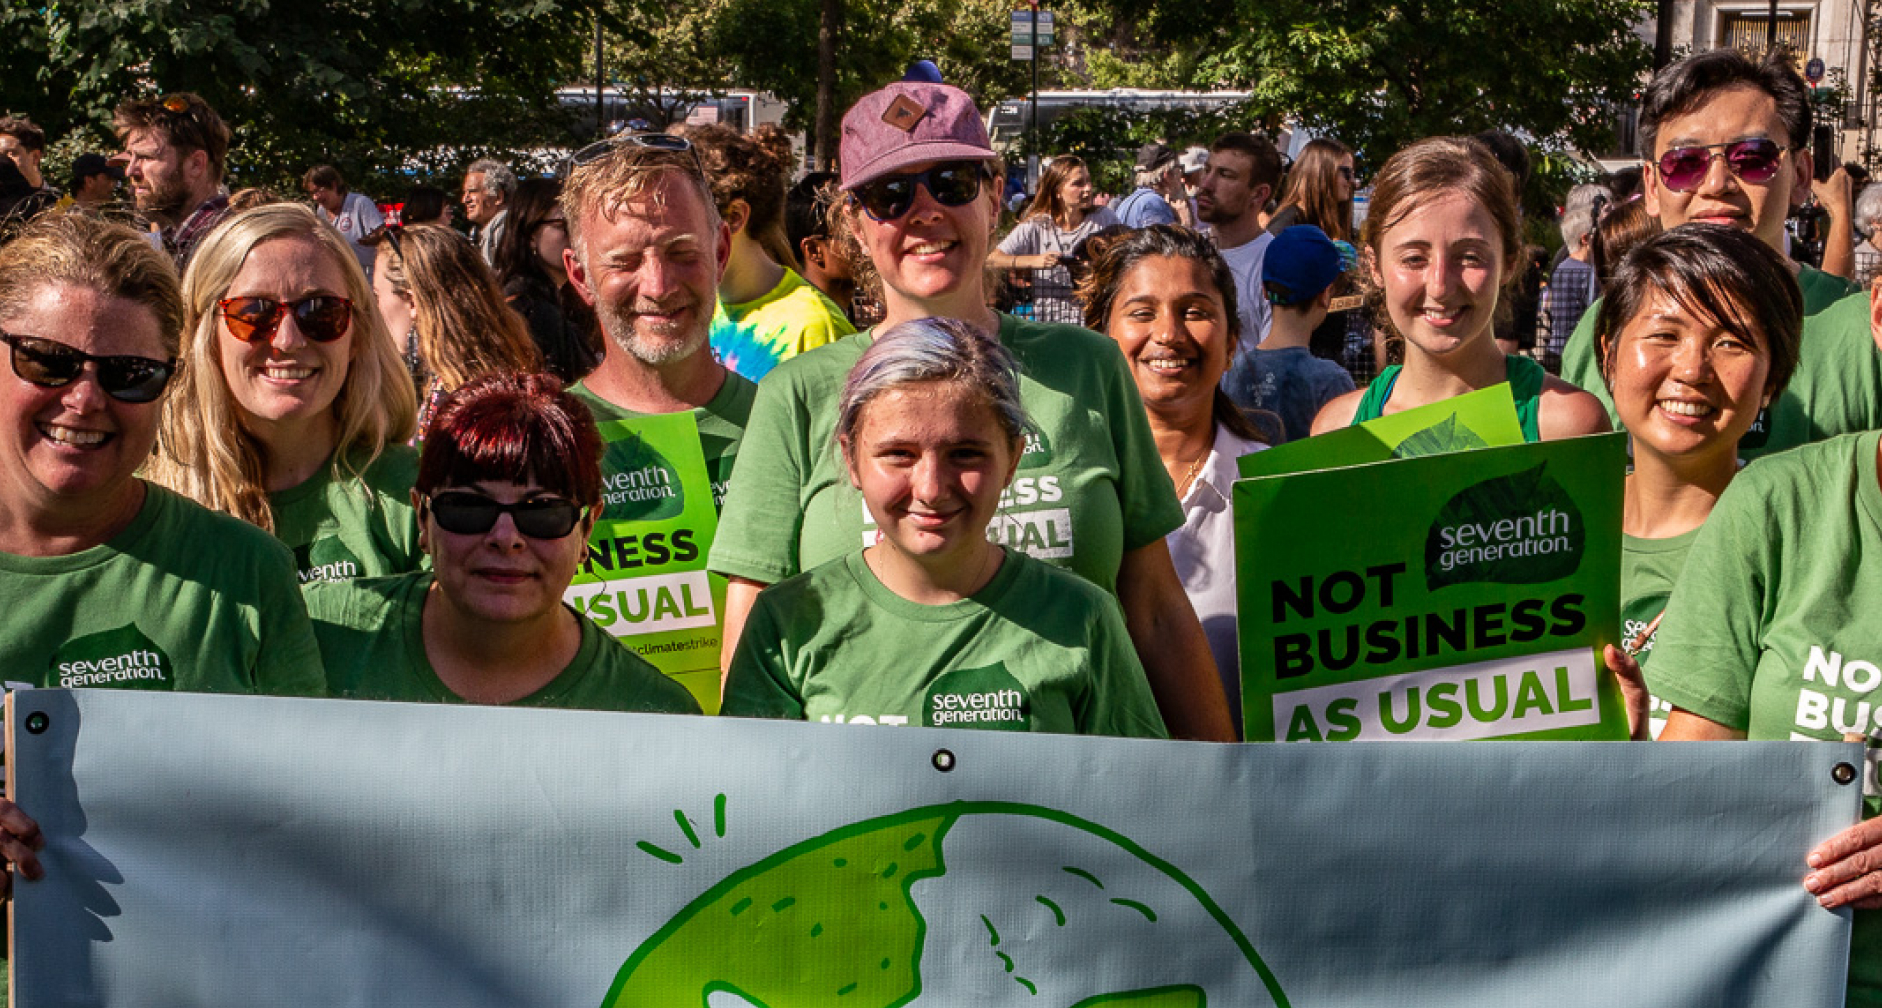 Image of Seventh Generation employees marching during 2019 Global Climate March